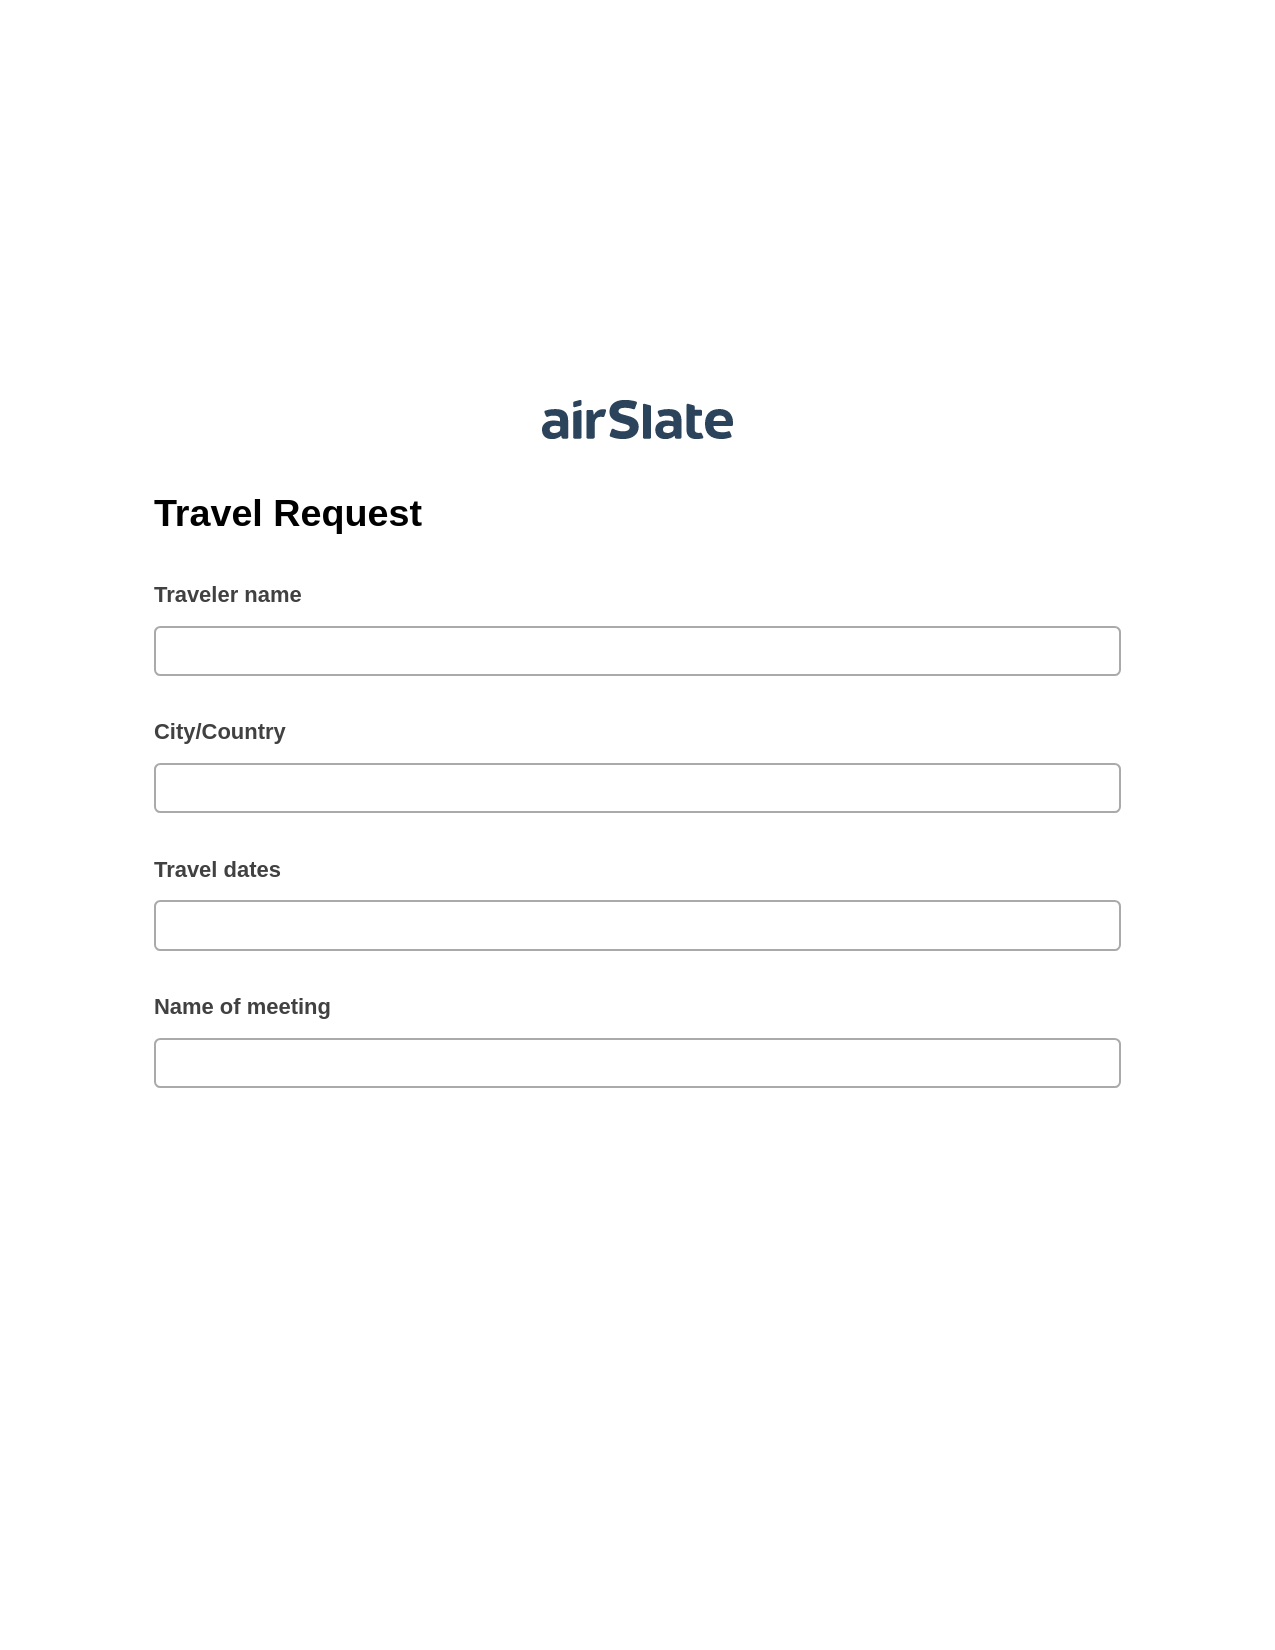 Travel Request Pre-fill Dropdowns from Excel Bot, Create slate addon, Export to Formstack Documents Bot